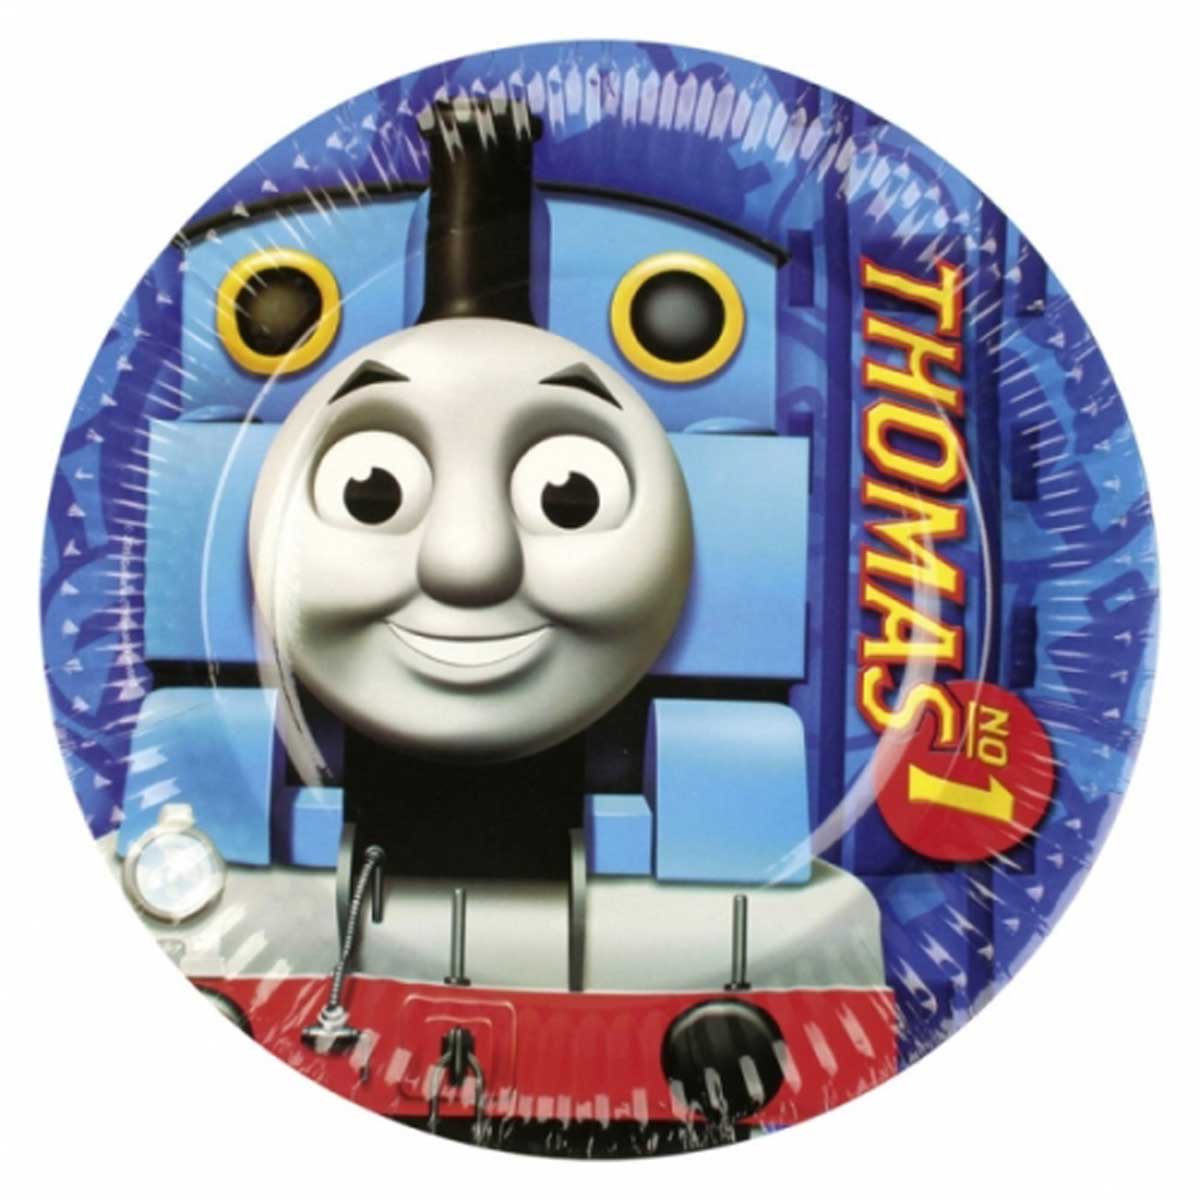 Thomas And Friends Plates 9in, 8pcs Printed Tableware - Party Centre - Party Centre